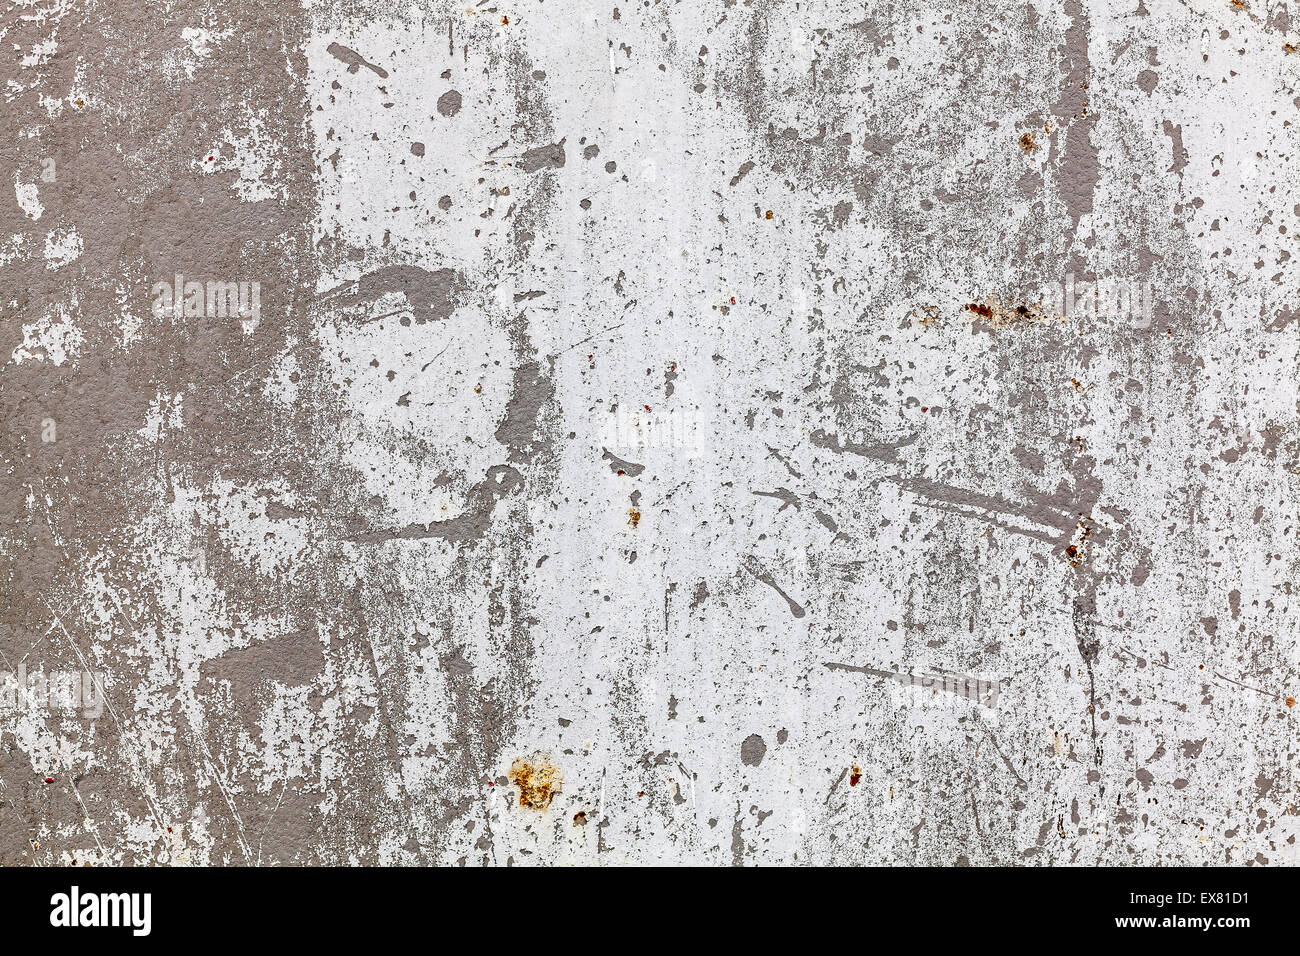 Background or texture of the old cracked wall with peeling paint. Stock Photo